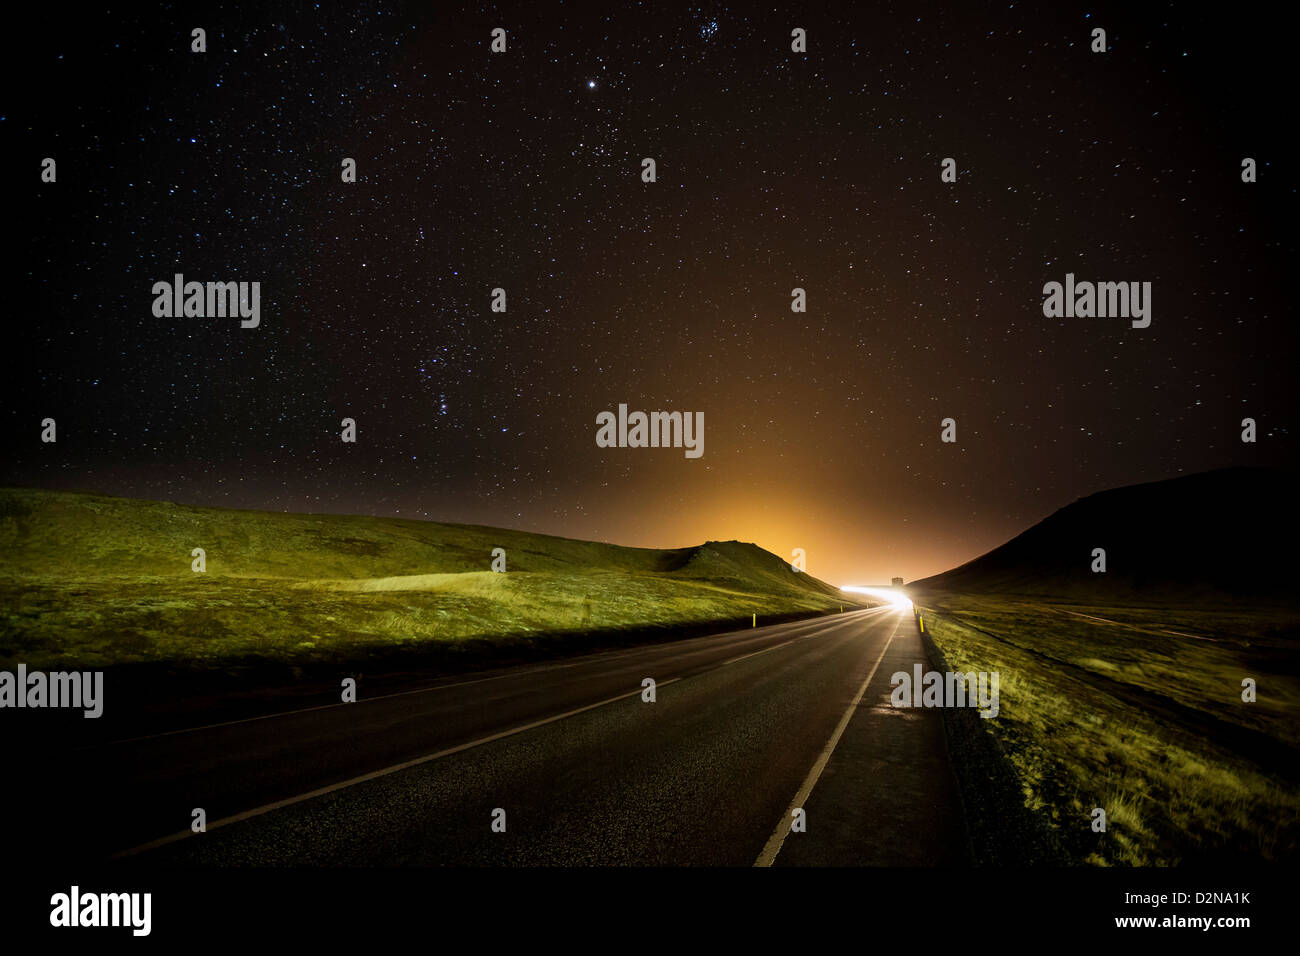 Starry night over road and landscape, Iceland Stock Photo